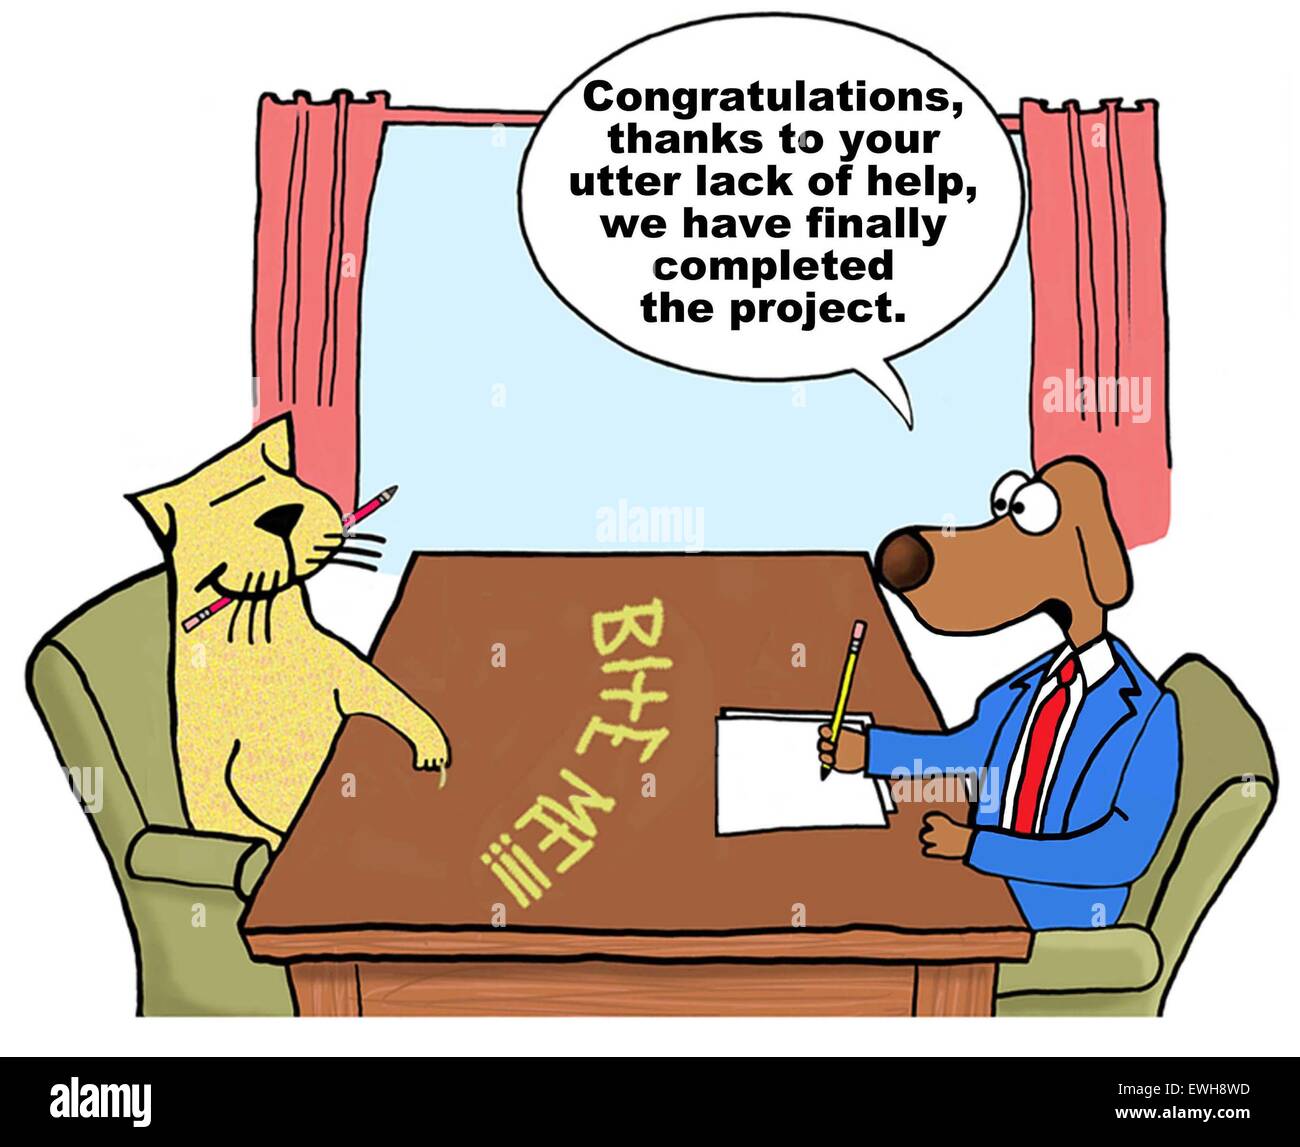 Business cartoon of business dog saying to cat, '...your utter lack of help, we have finally completed the project'. Stock Photo